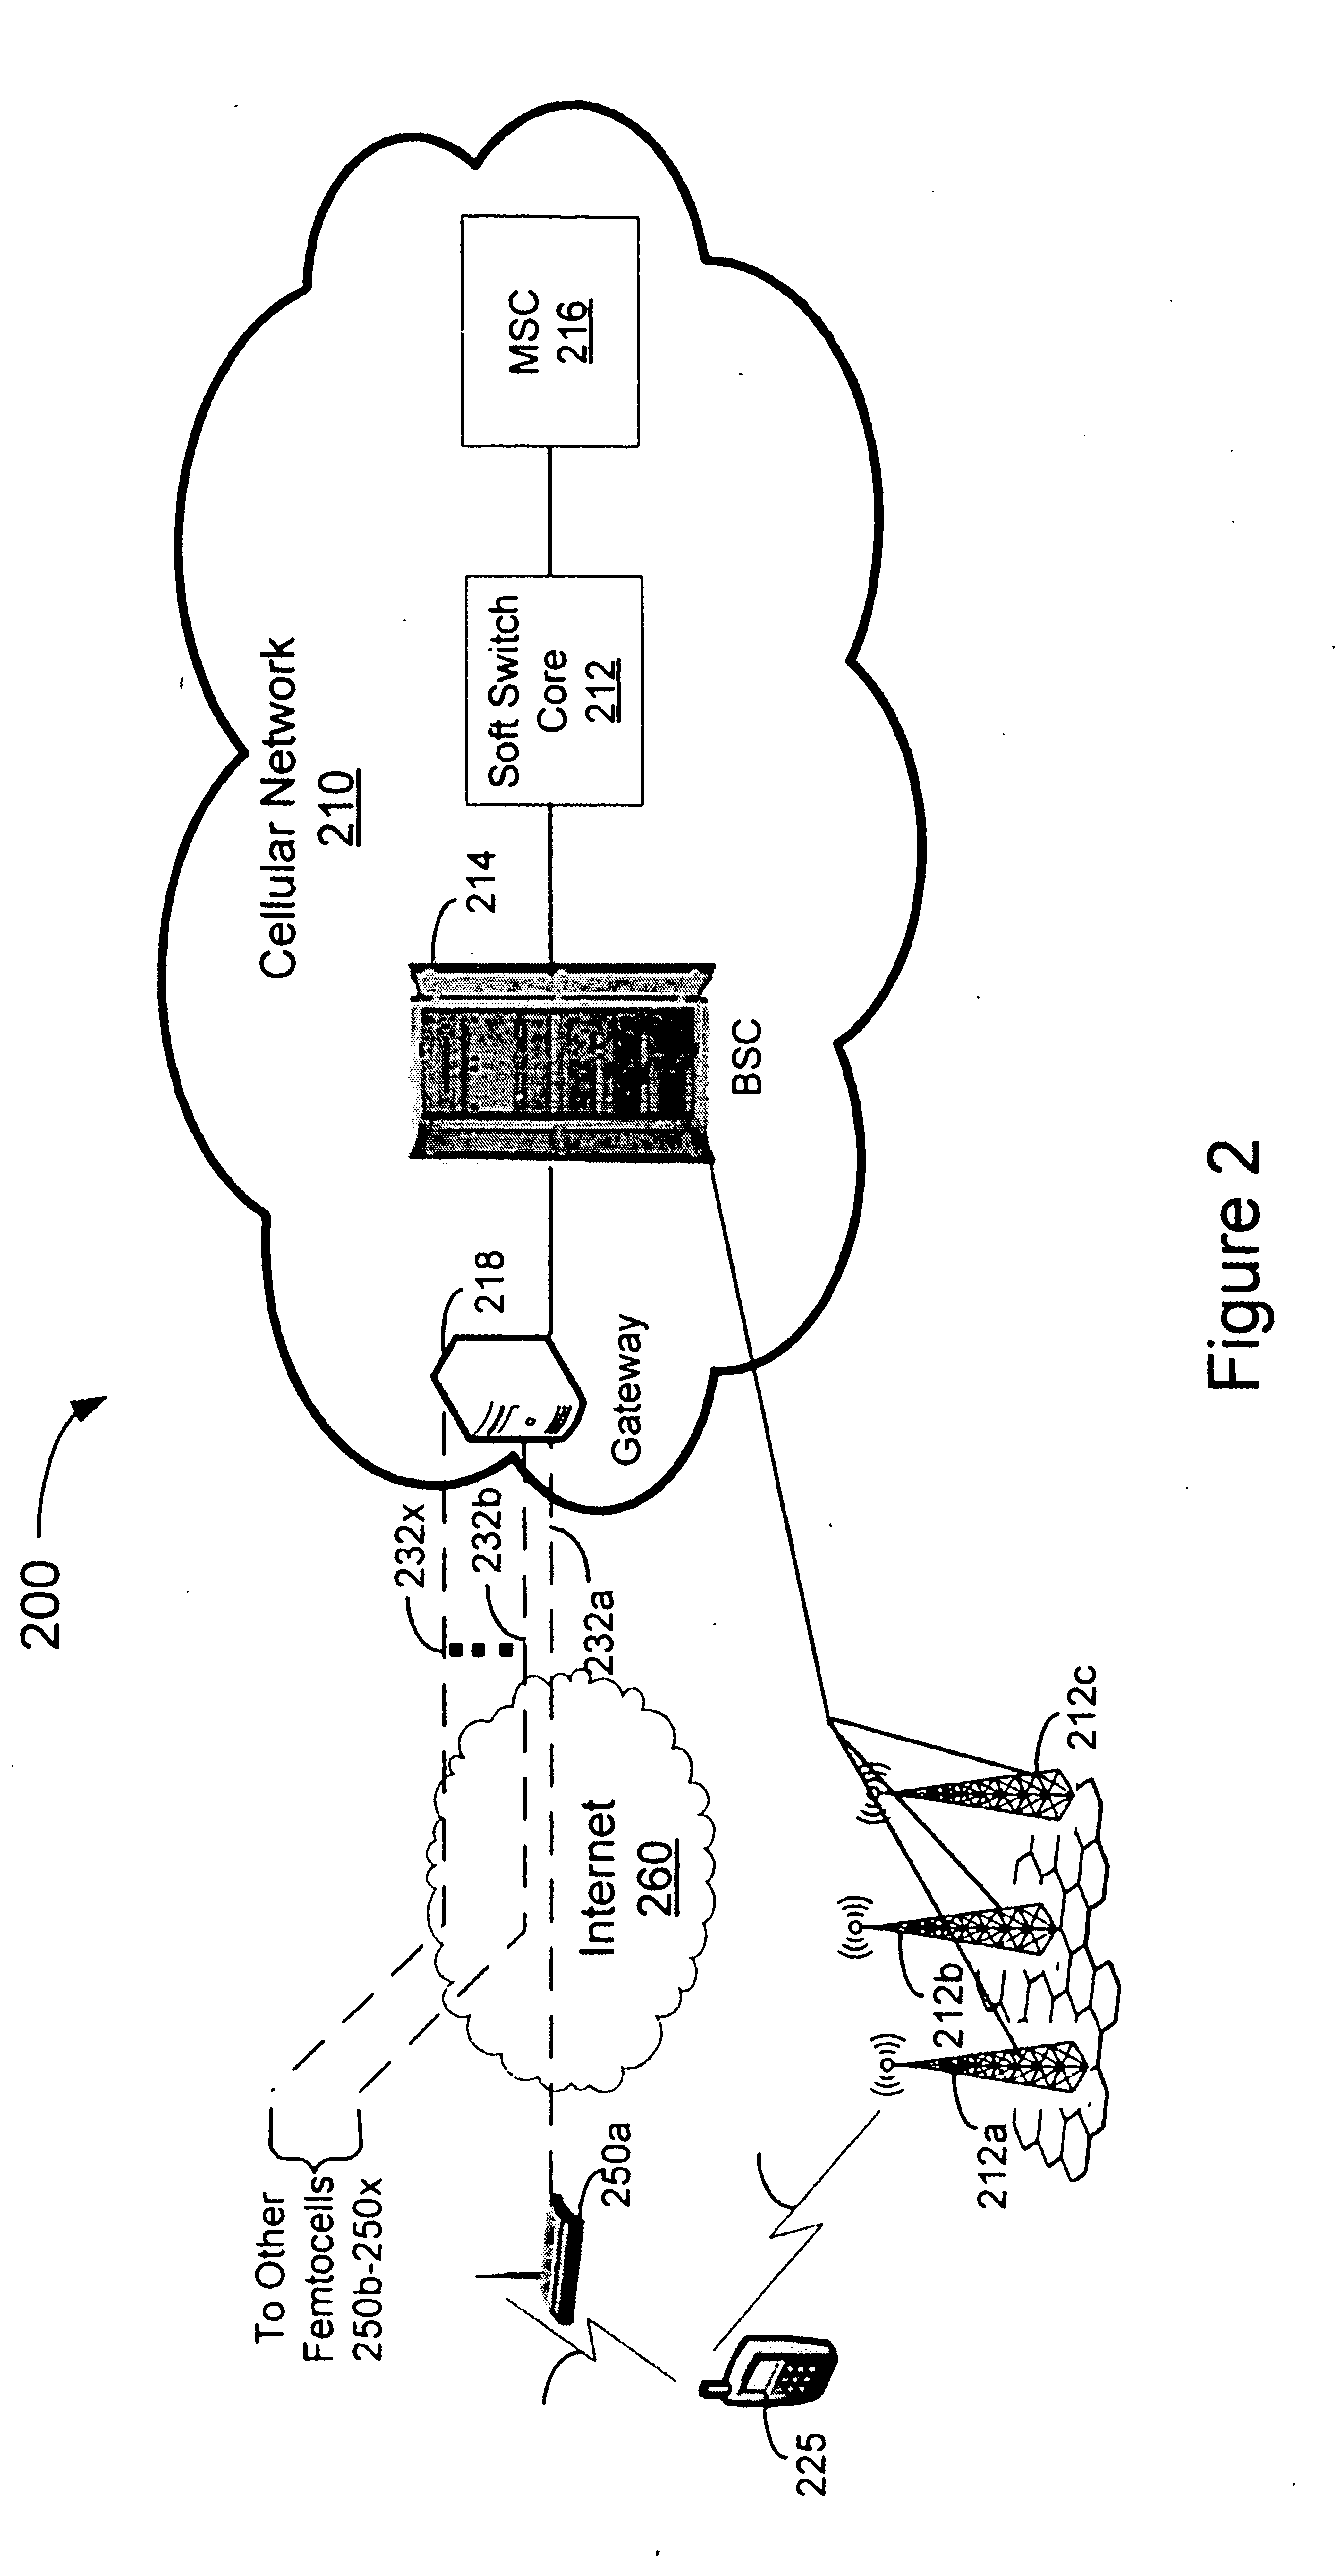 System, method, and computer-readable medium for user equipment handoff from a macrocellular network to an ip-femtocell network